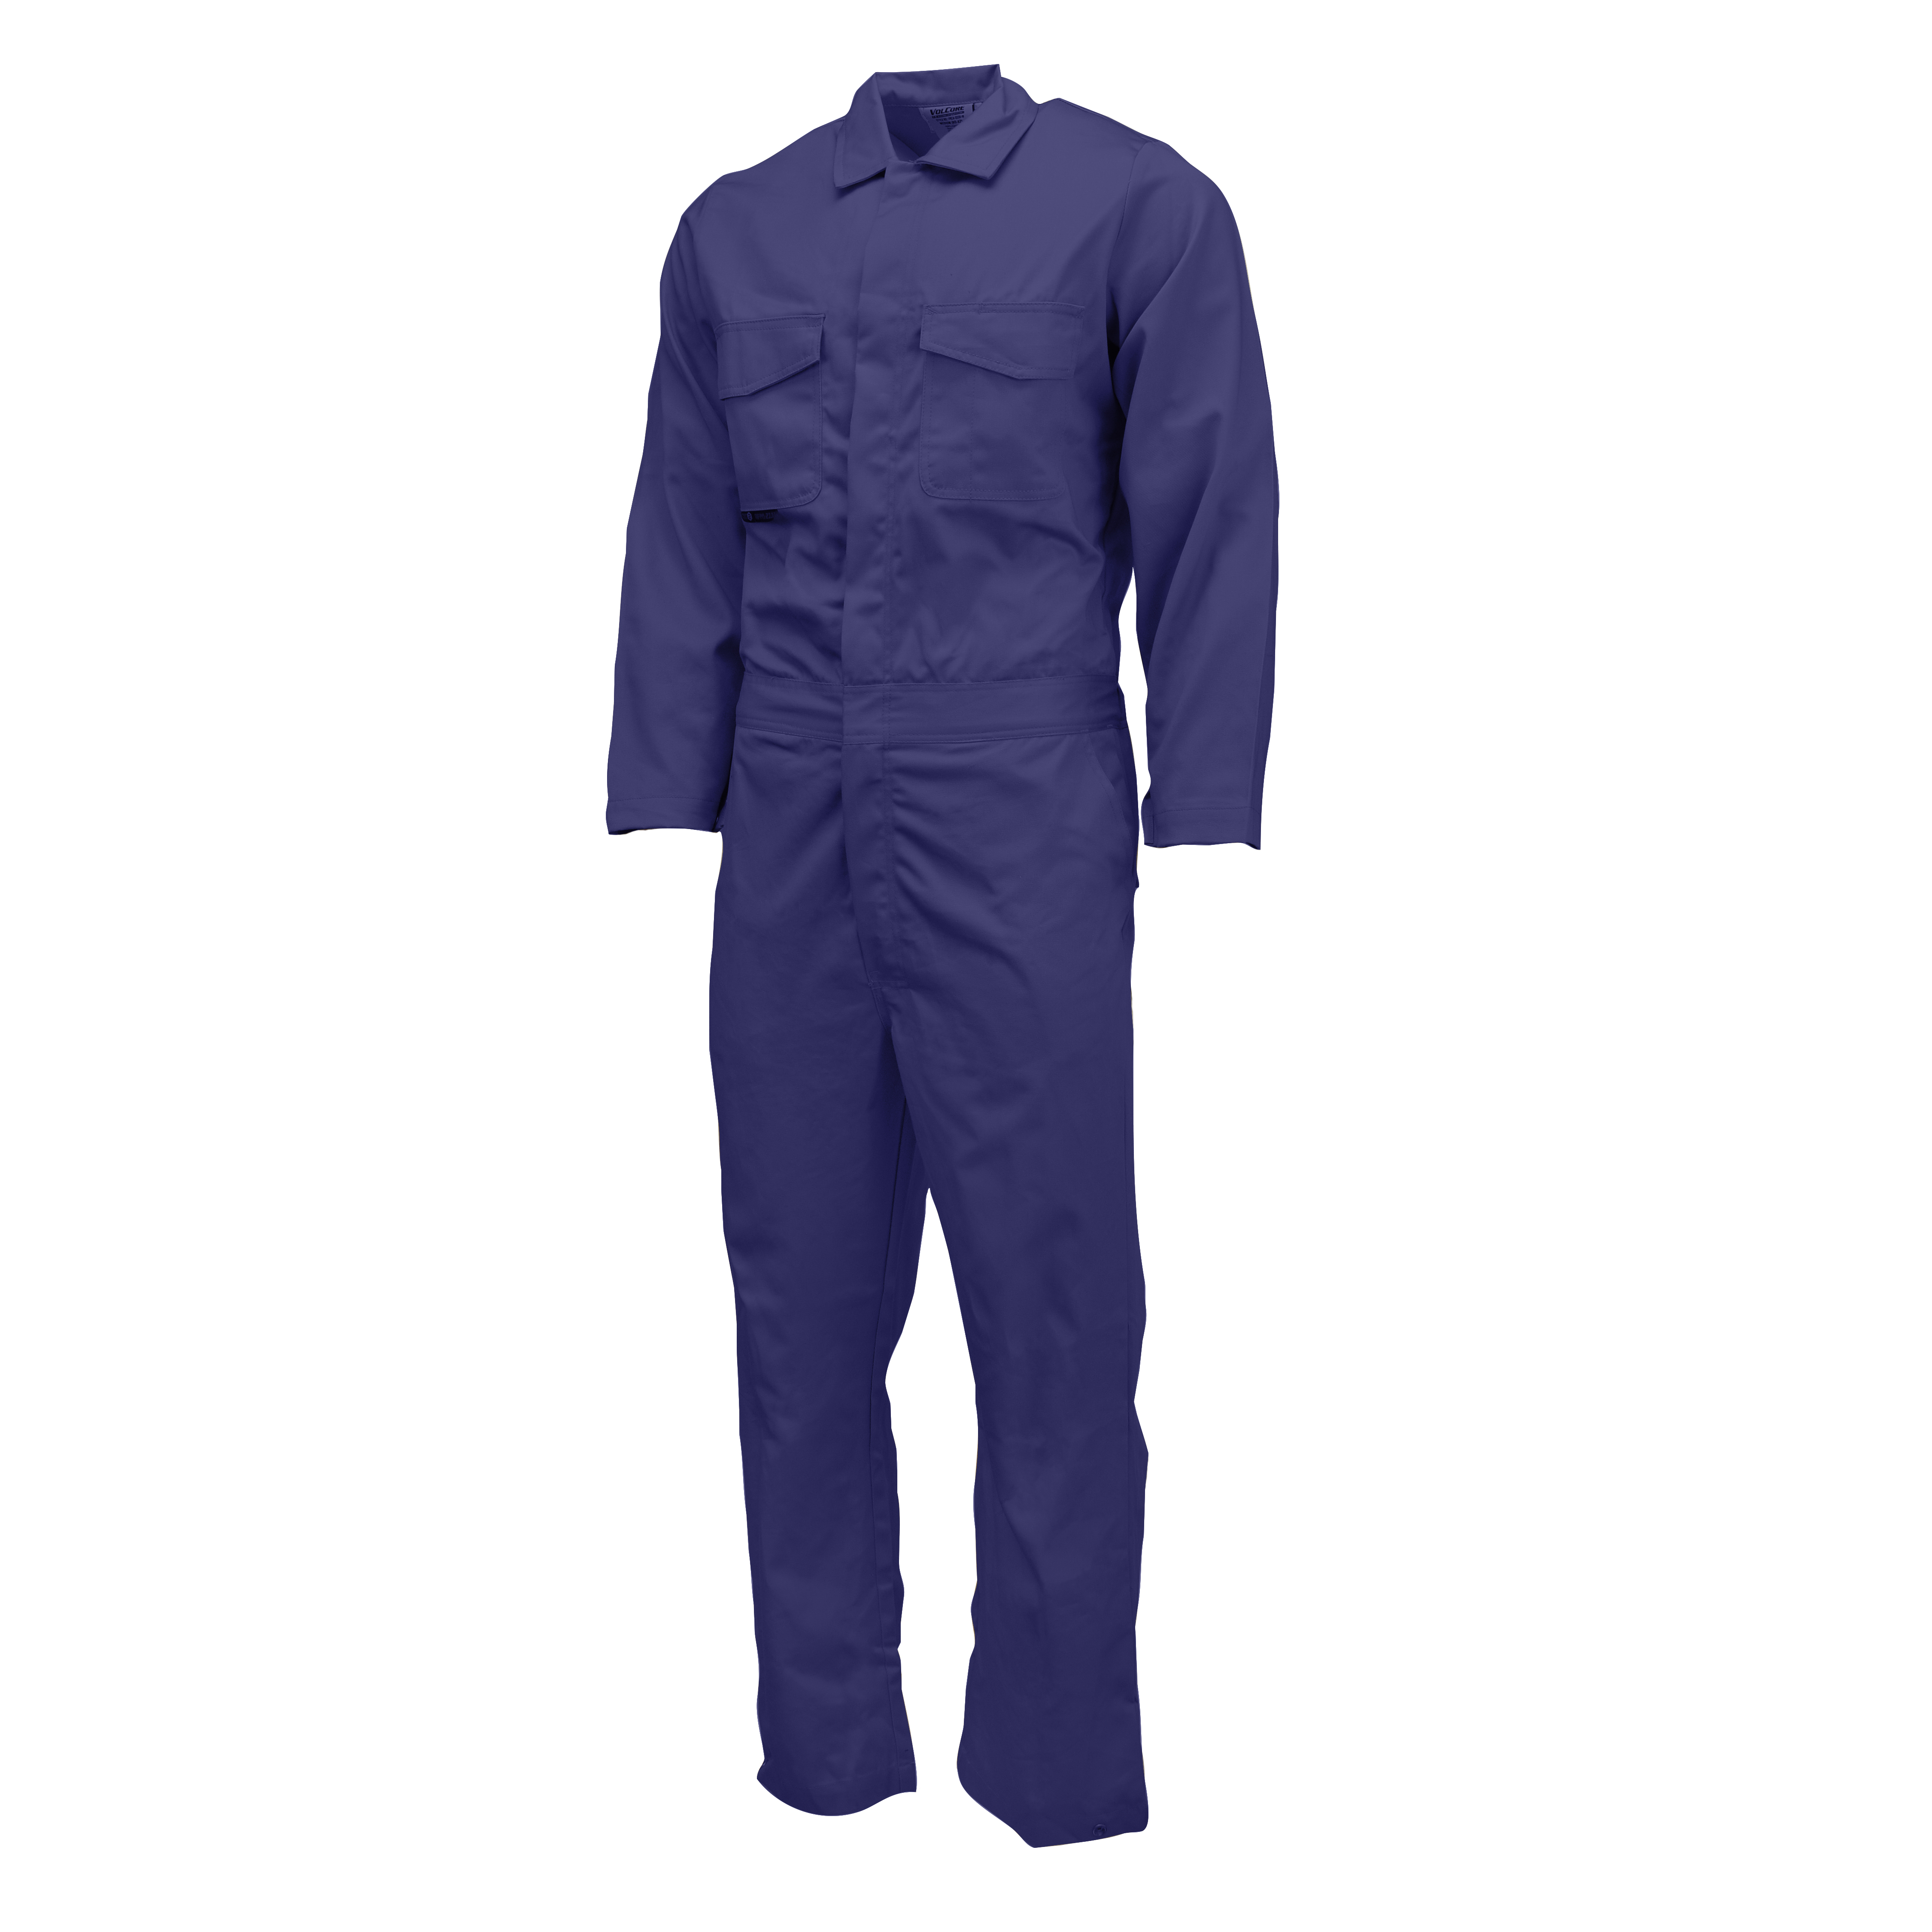 FRCA-003 VolCore™ Cotton FR Coverall - Navy - Size 2X